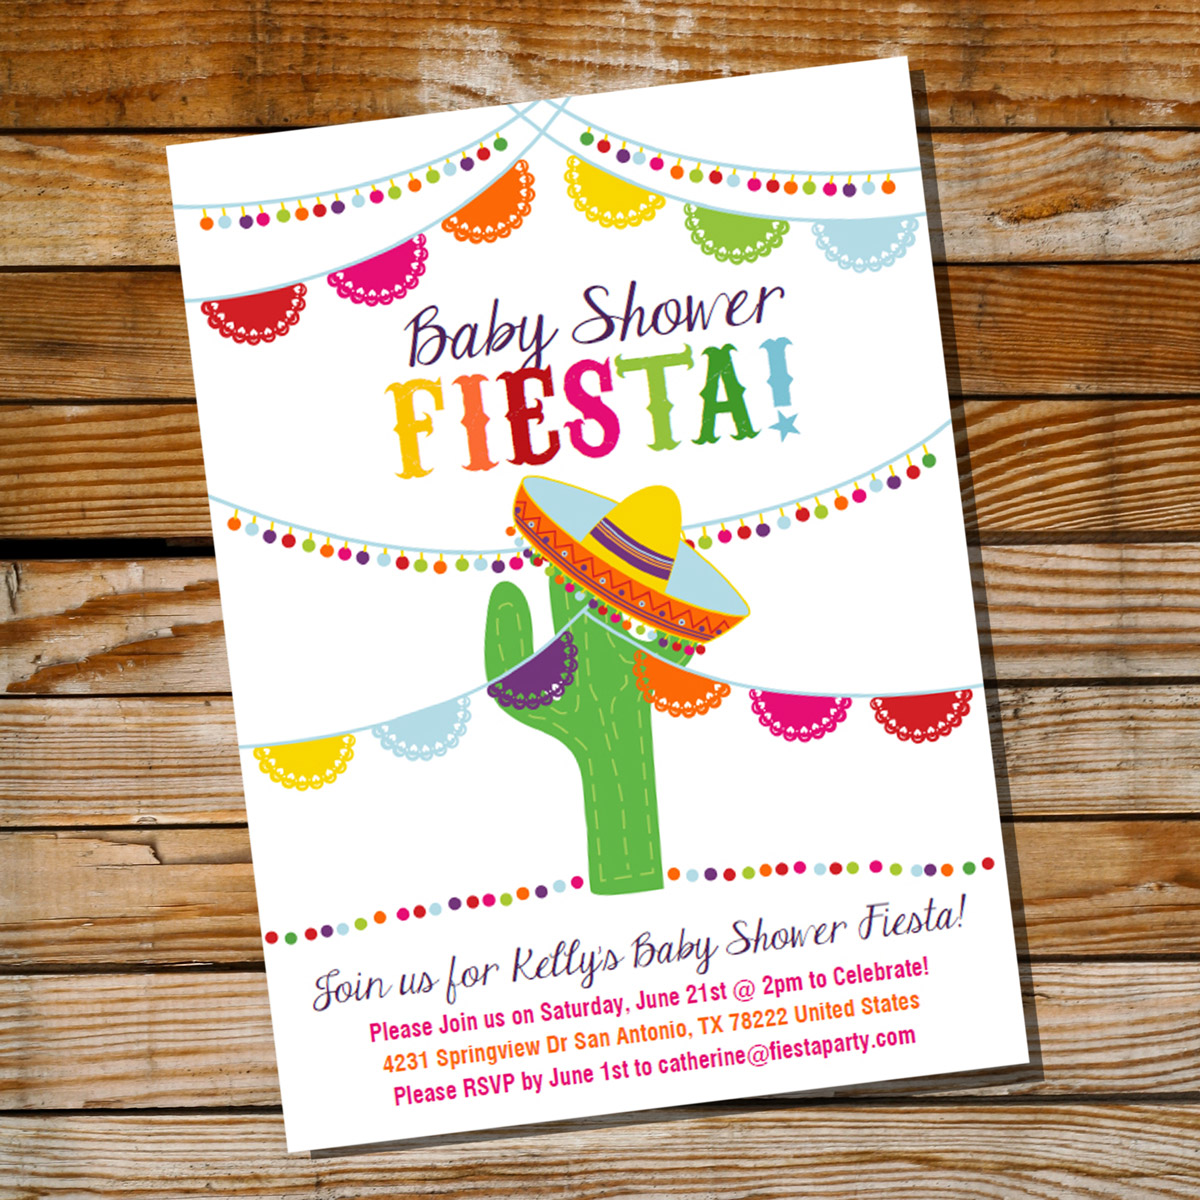 Top 7 Fiesta Party Ideas - Save-On-Crafts